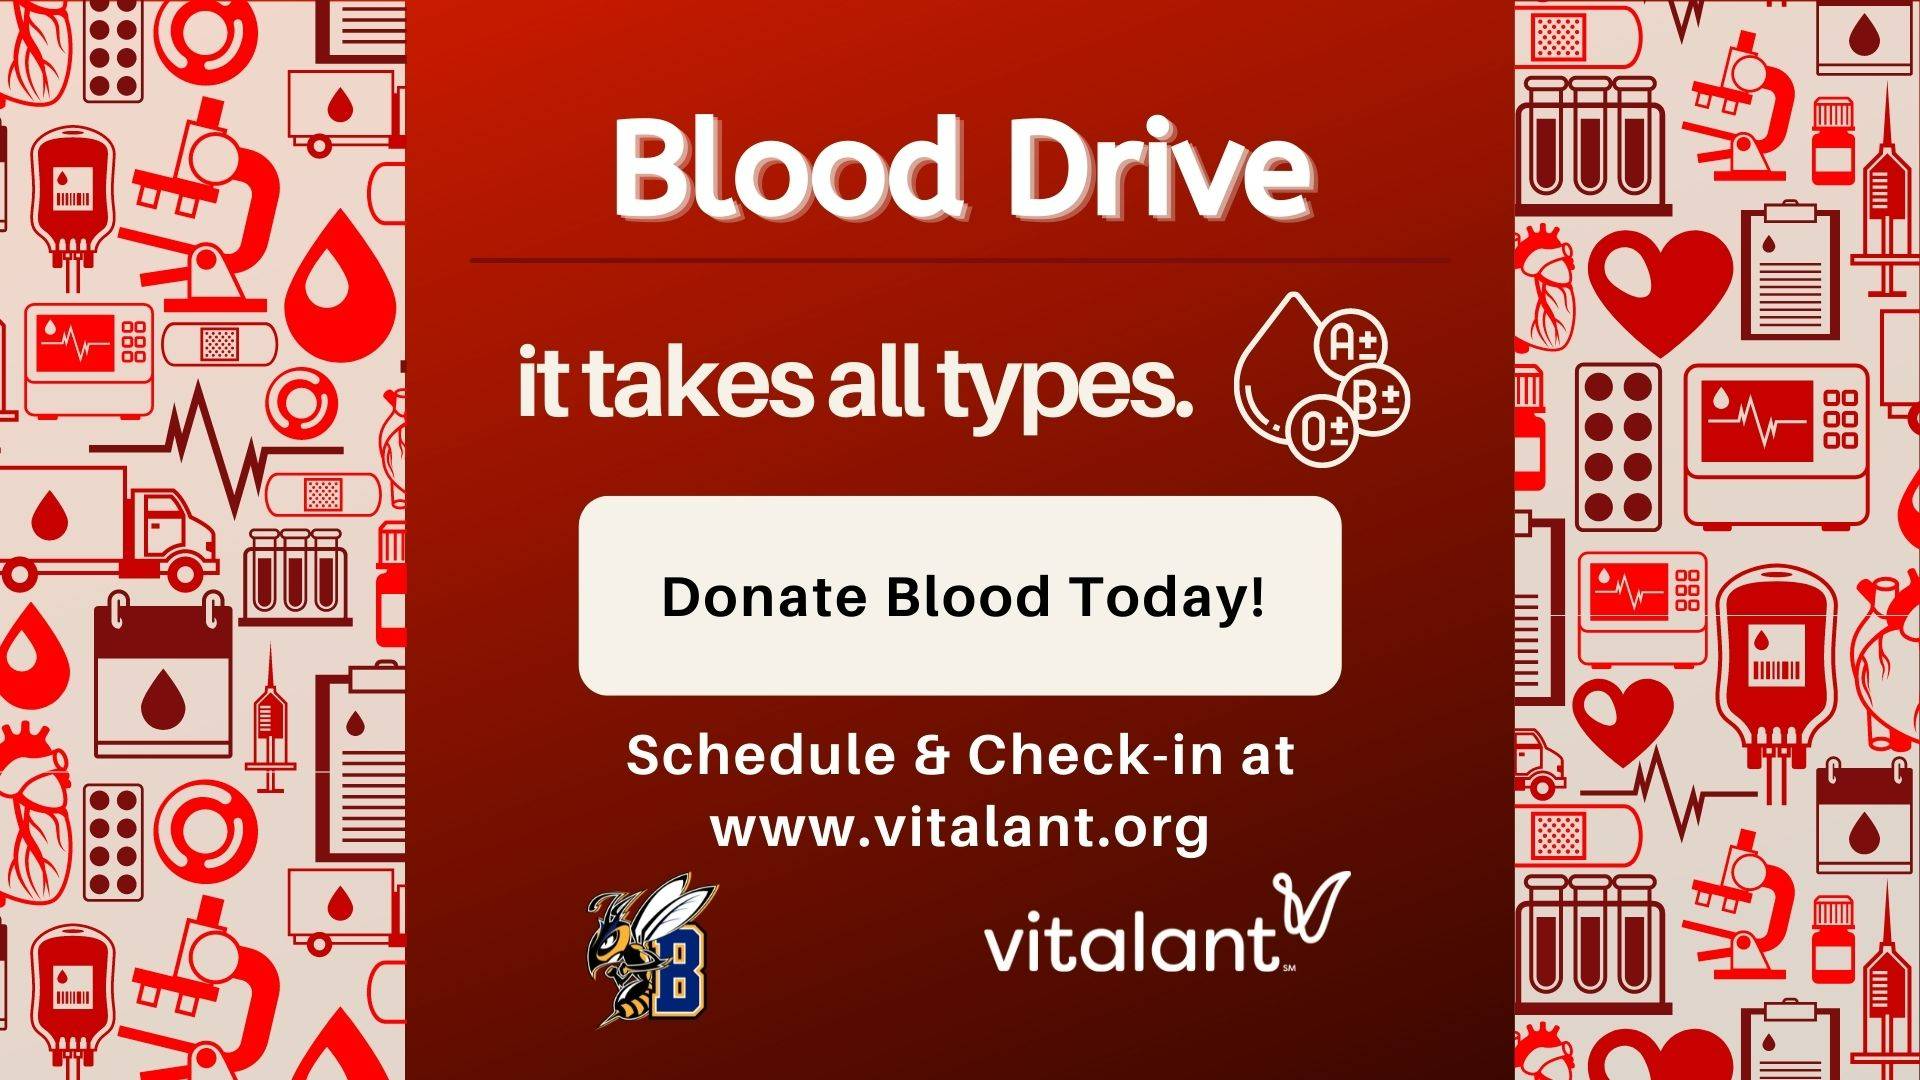 Blood Drive. It takes all types. Donate today. Schedule and Check-in at www.vitalant.org